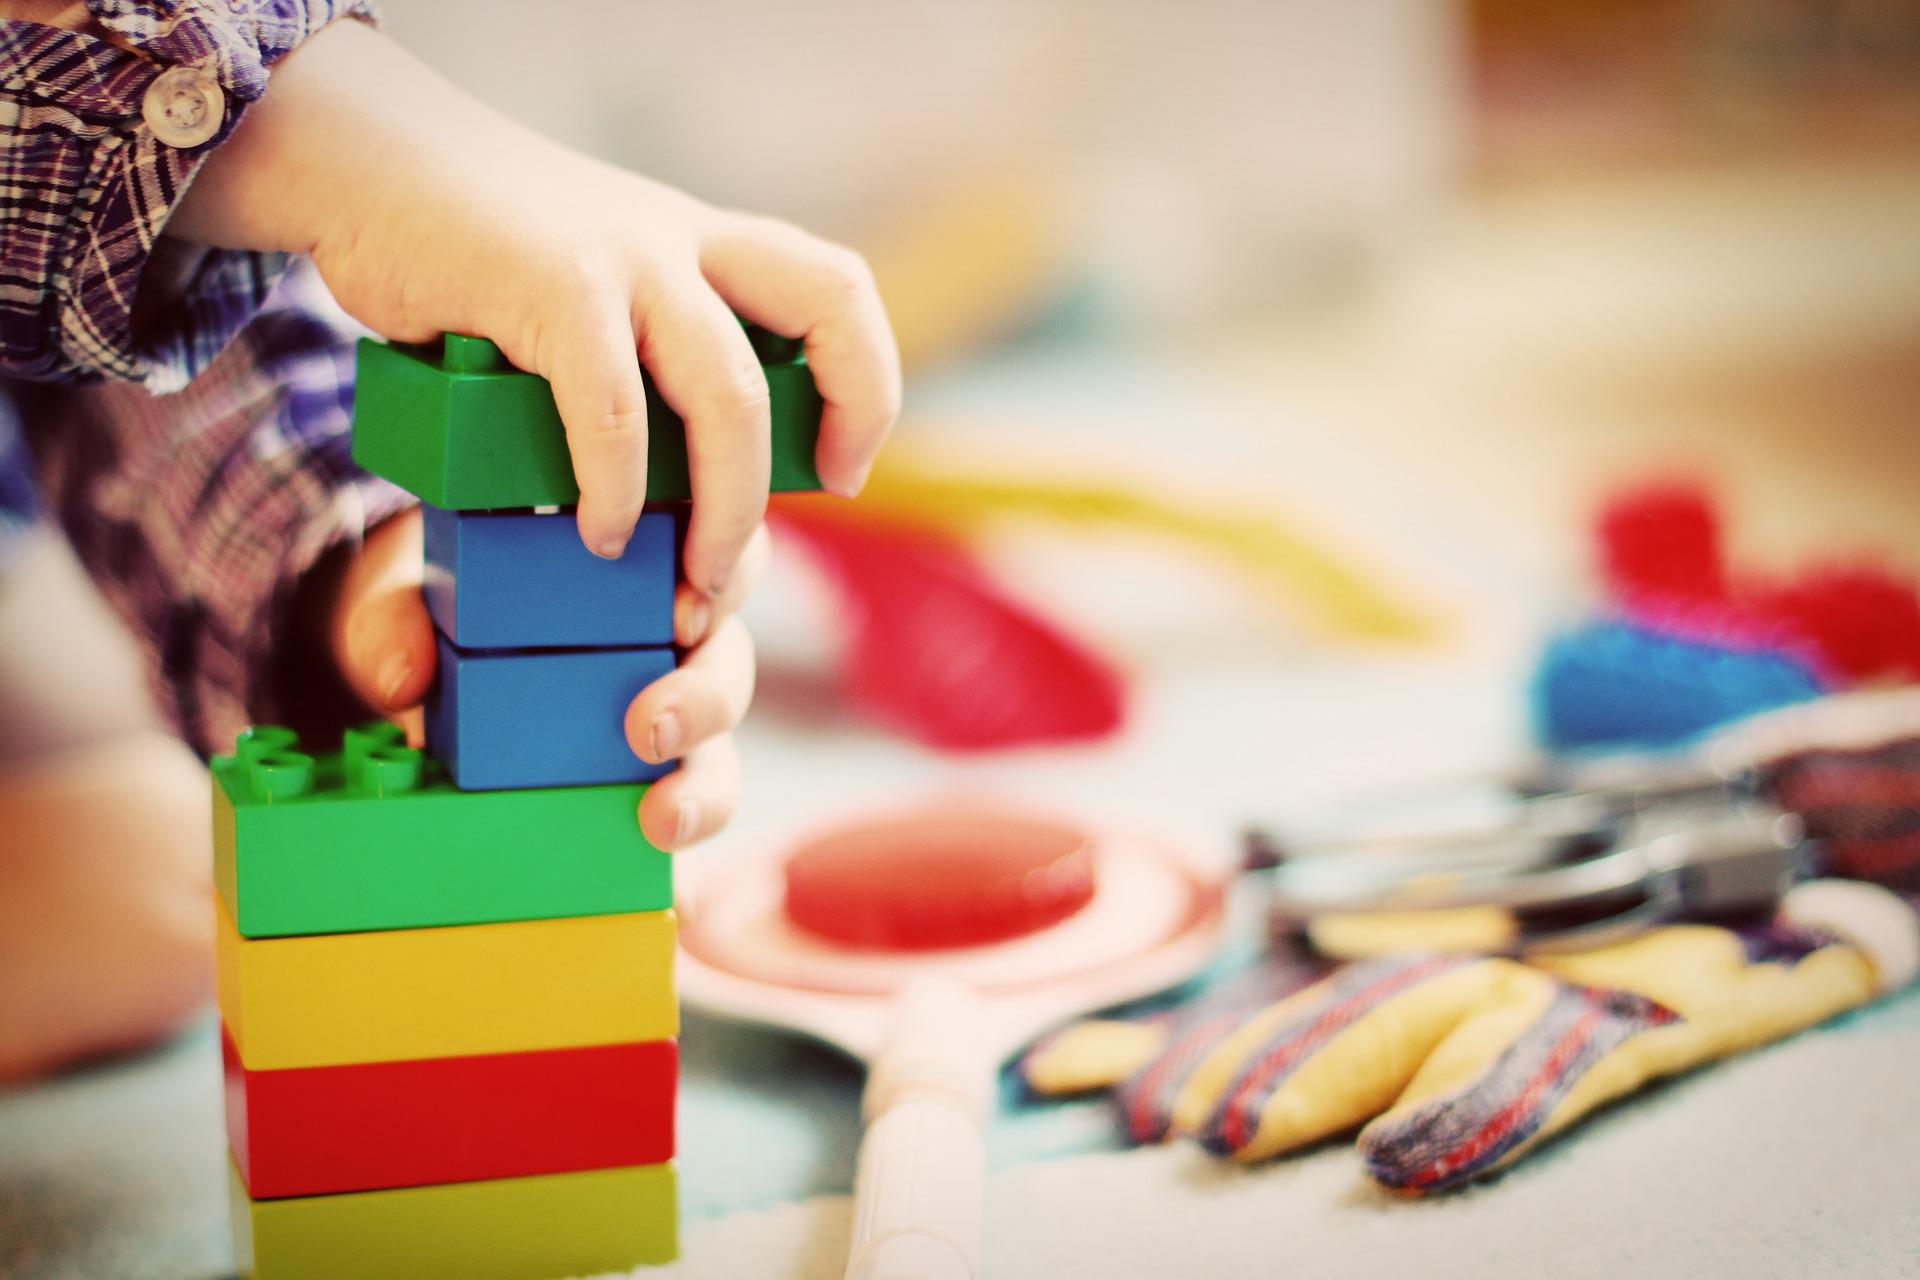 A child building with blocks.